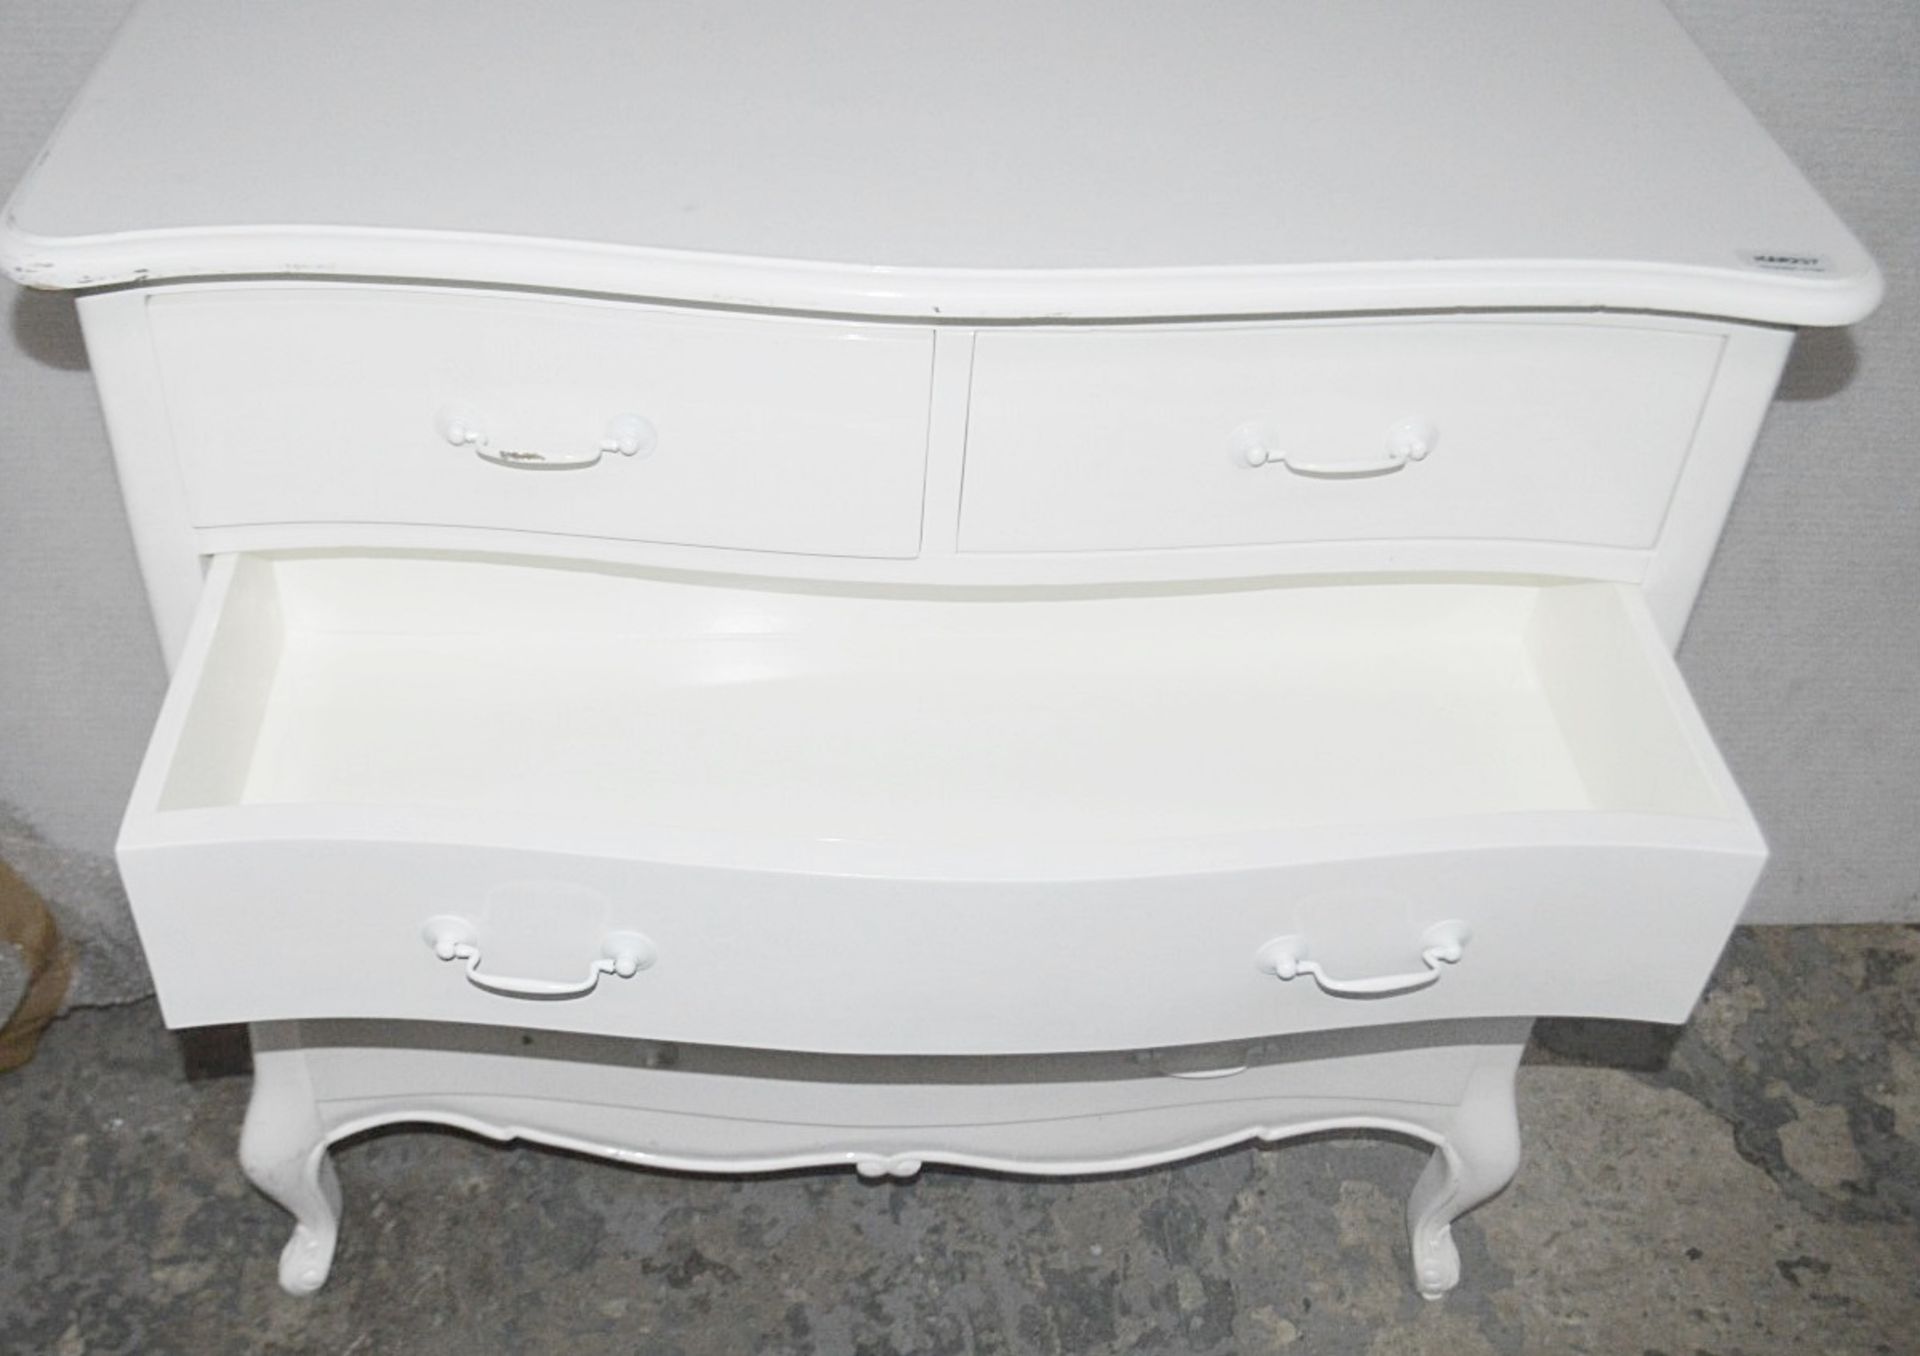 1 x Ornate 5-Drawer Unit In White - Ex-Display Showroom Piece - Dimensions: H90 x W94 x D45cm - Image 5 of 6